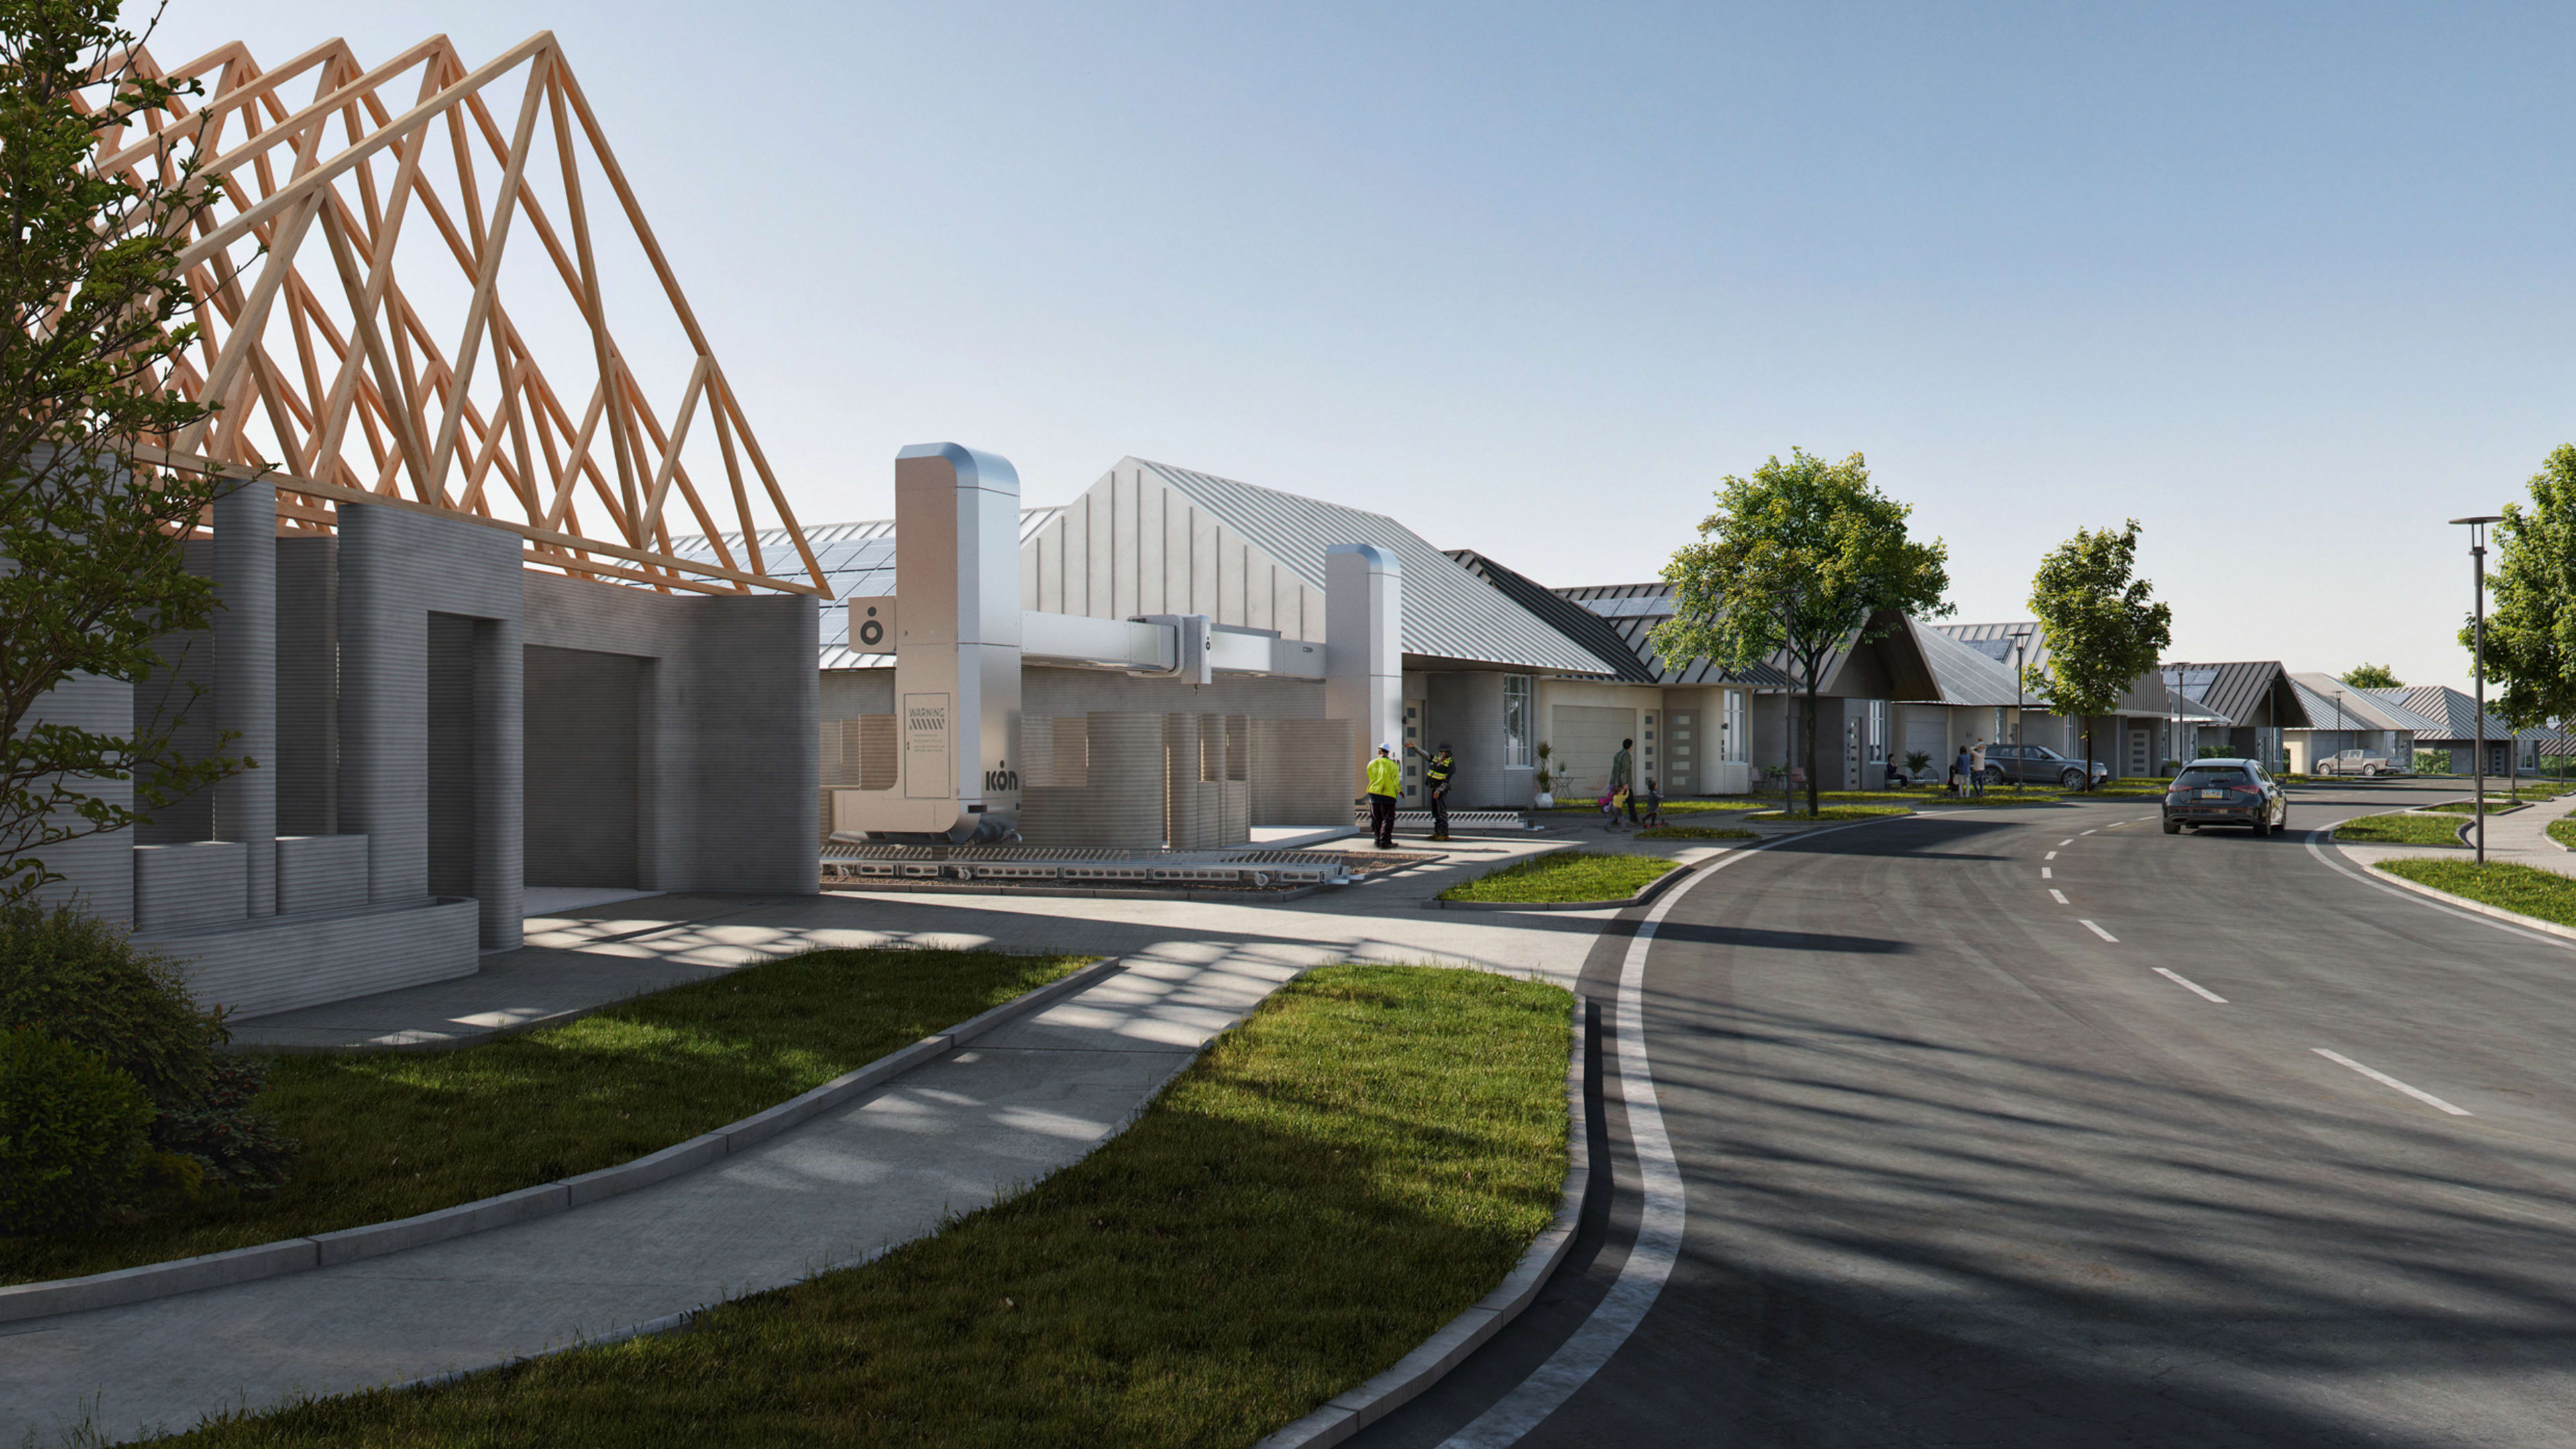 3D-printed houses are the suburbs of the future